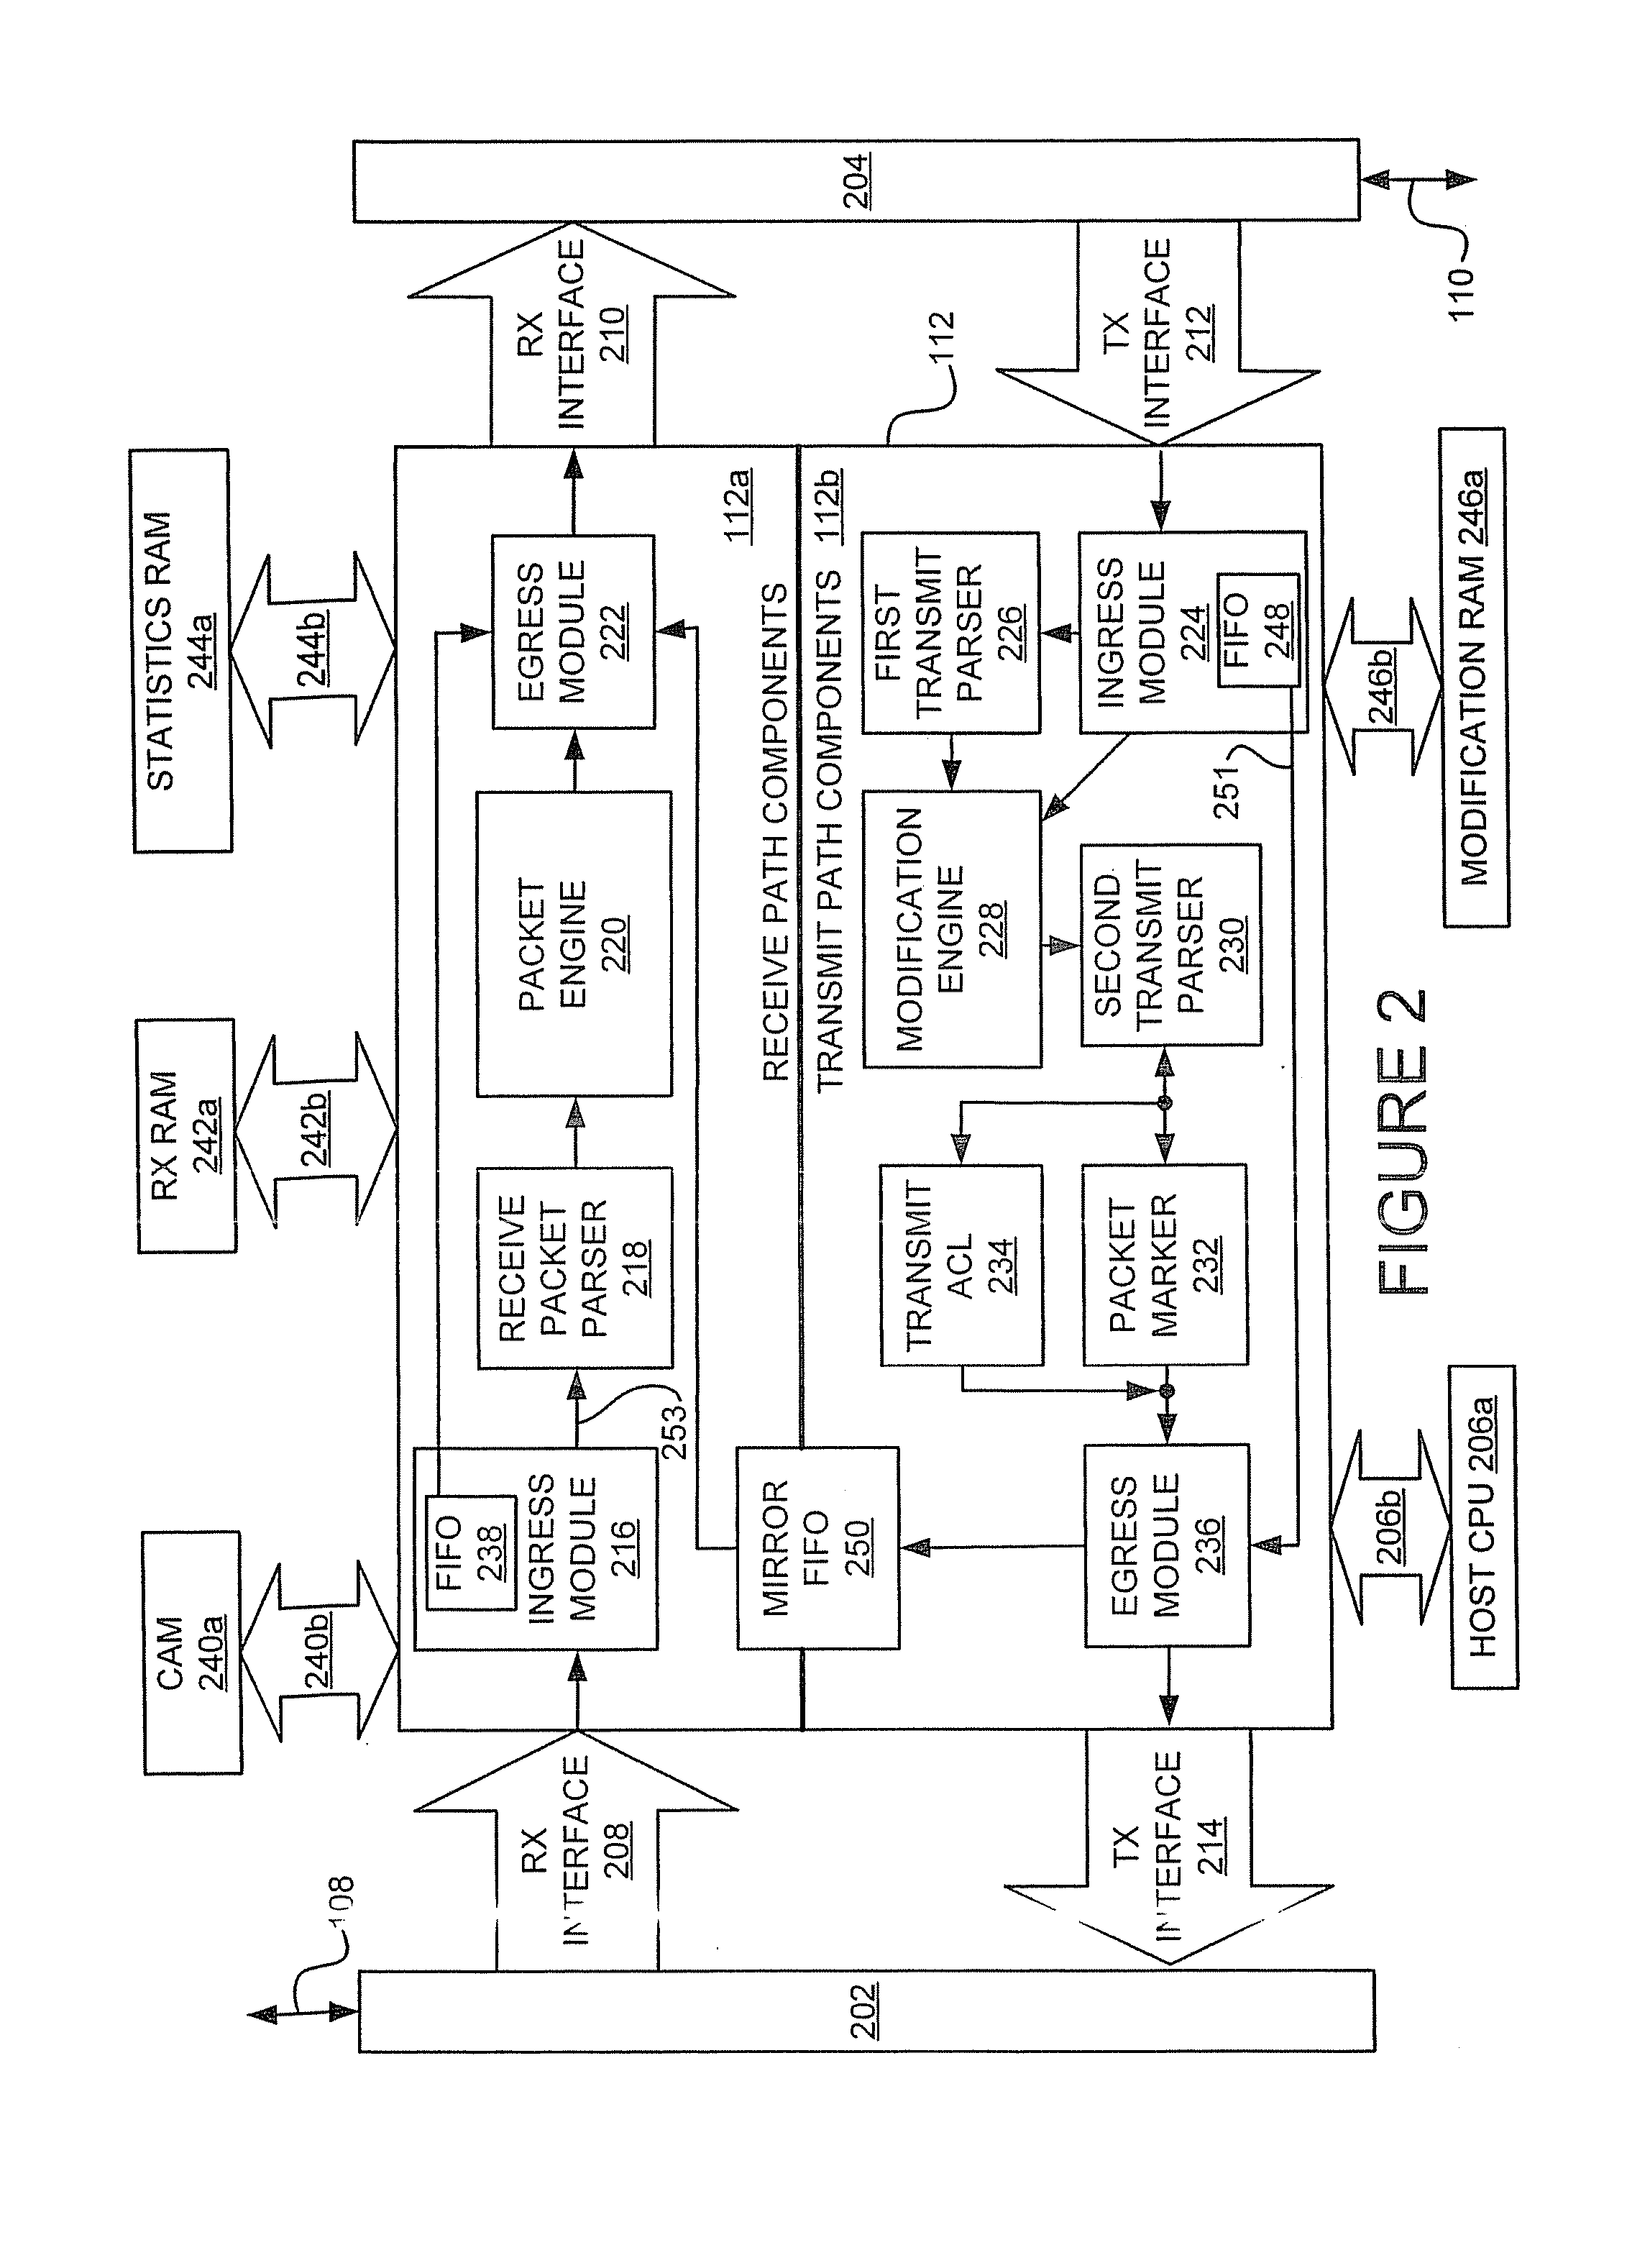 System and method for assembling a data packet